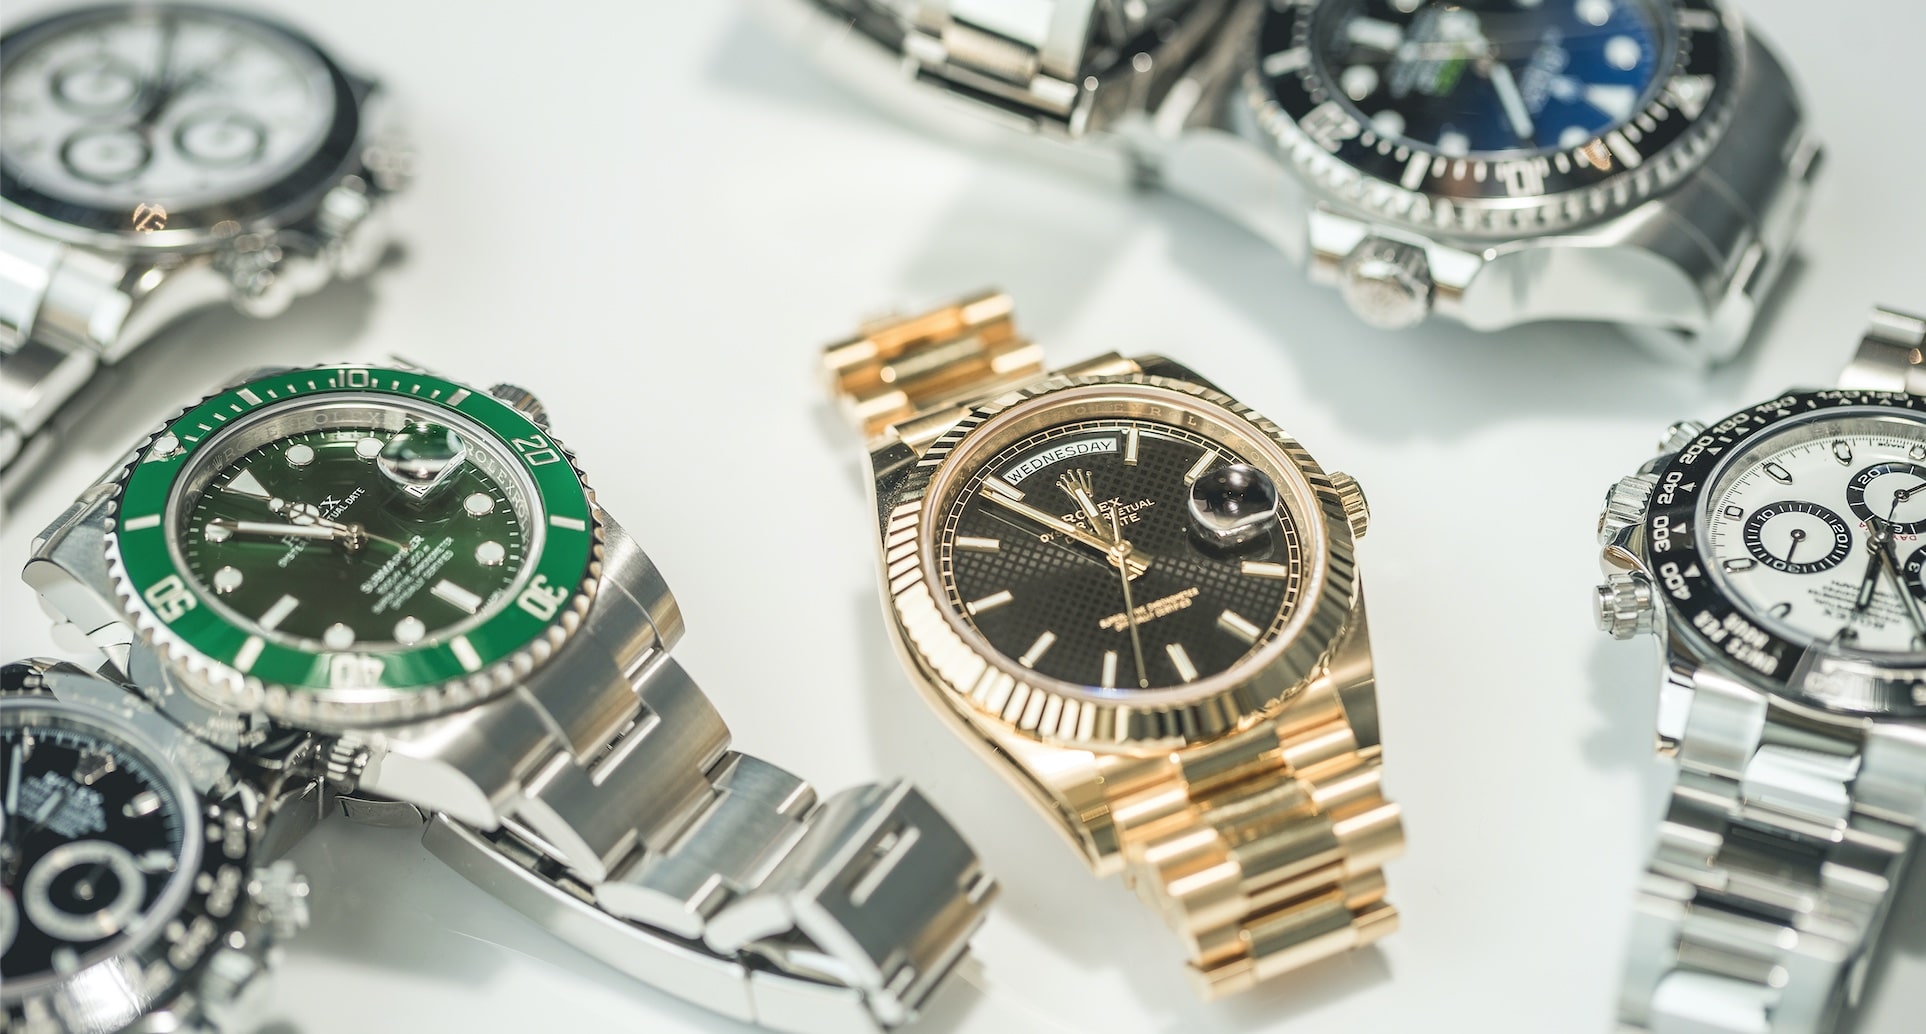 Ud Stranden skæg 2020 Rolex Predictions | What Might Be The New Rolex Watches